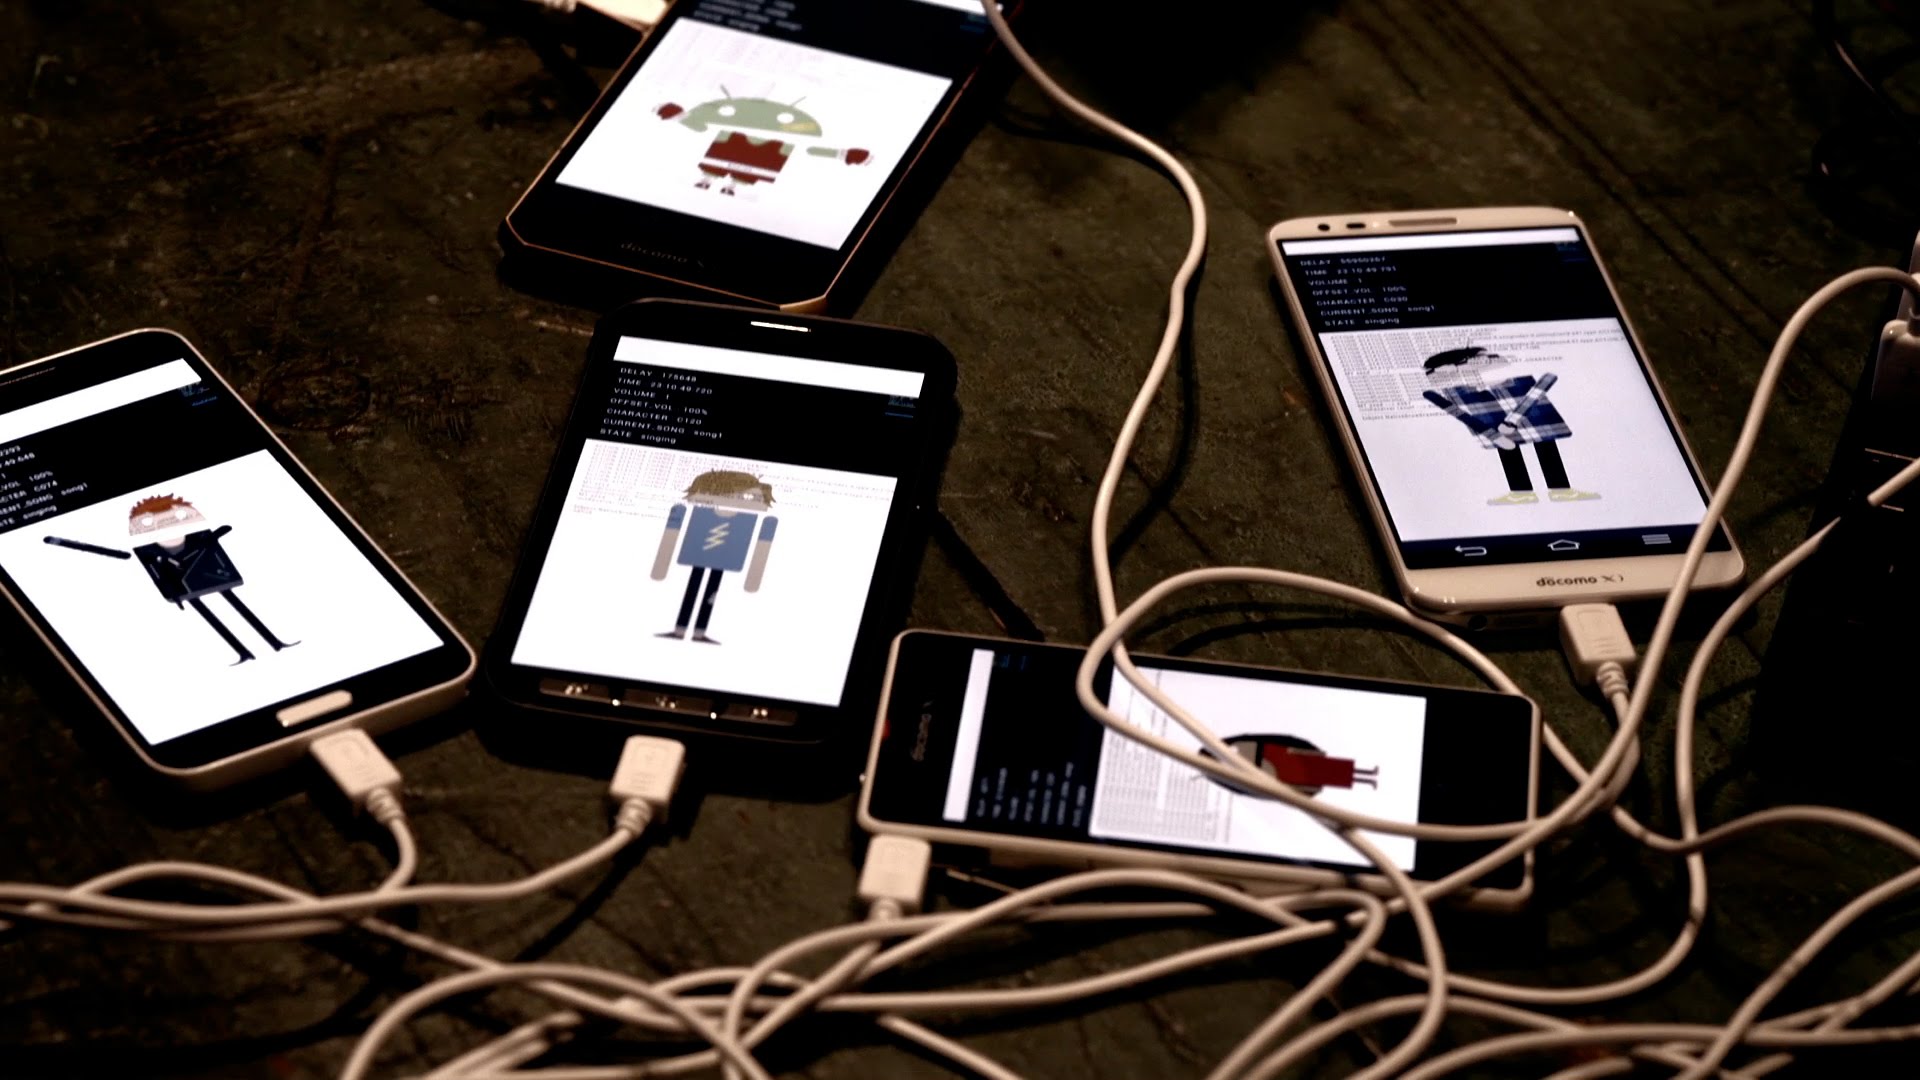 Beethoven's 'Ode to Joy' played on 300 Android Smartphones